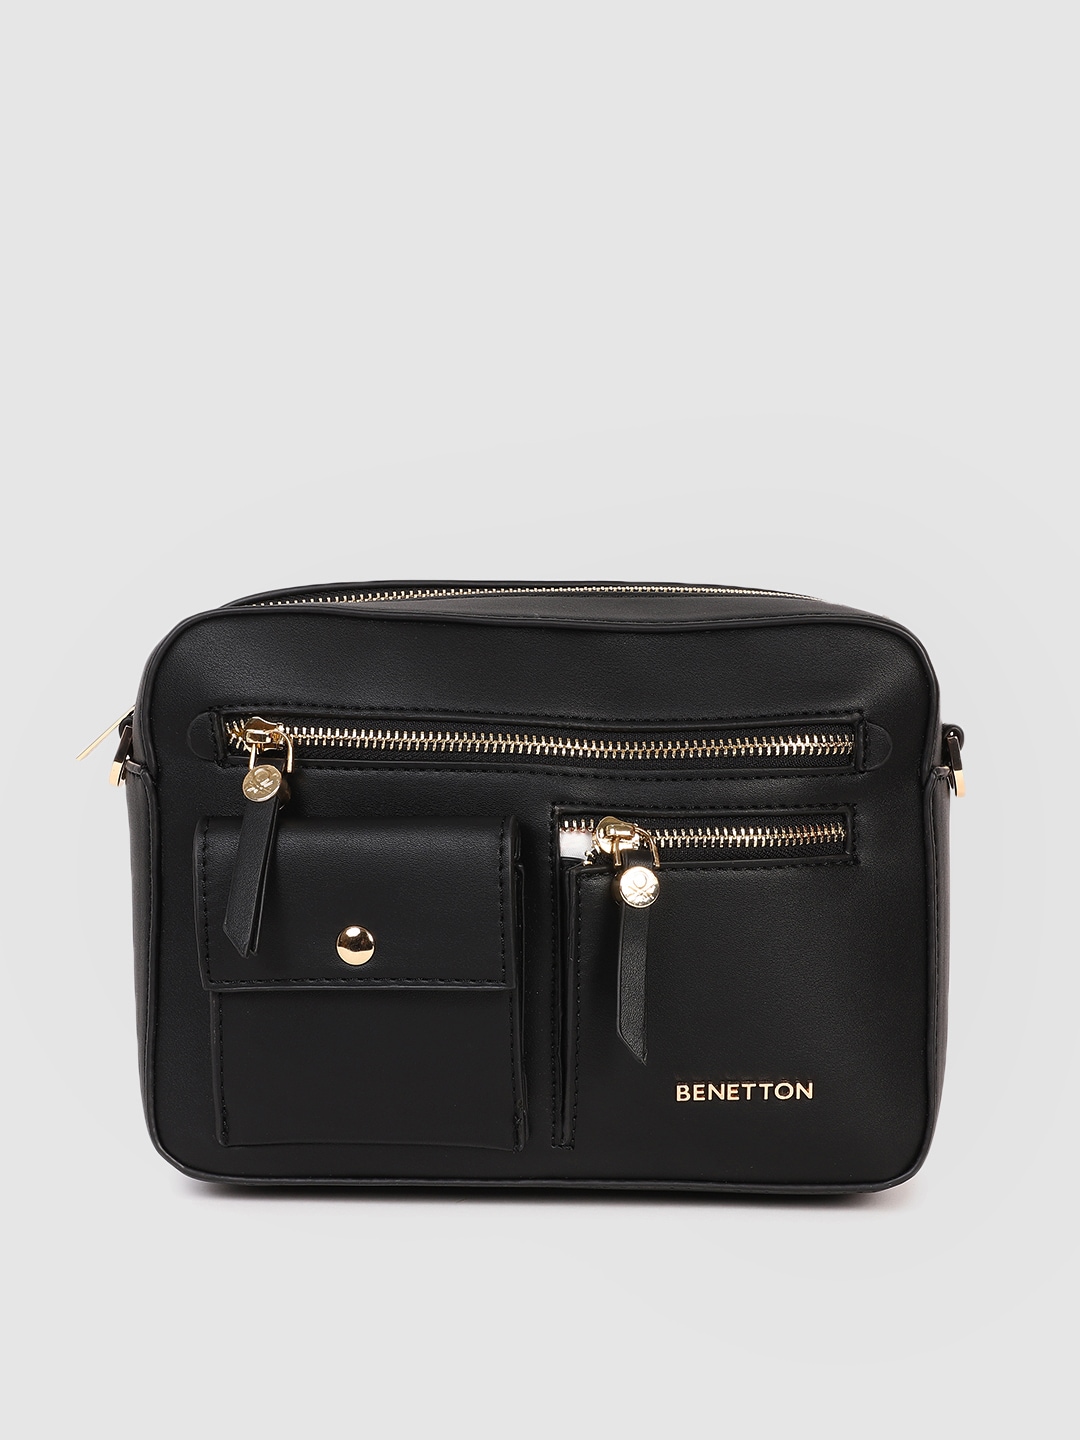 United Colors of Benetton Black Sling Bag Price in India